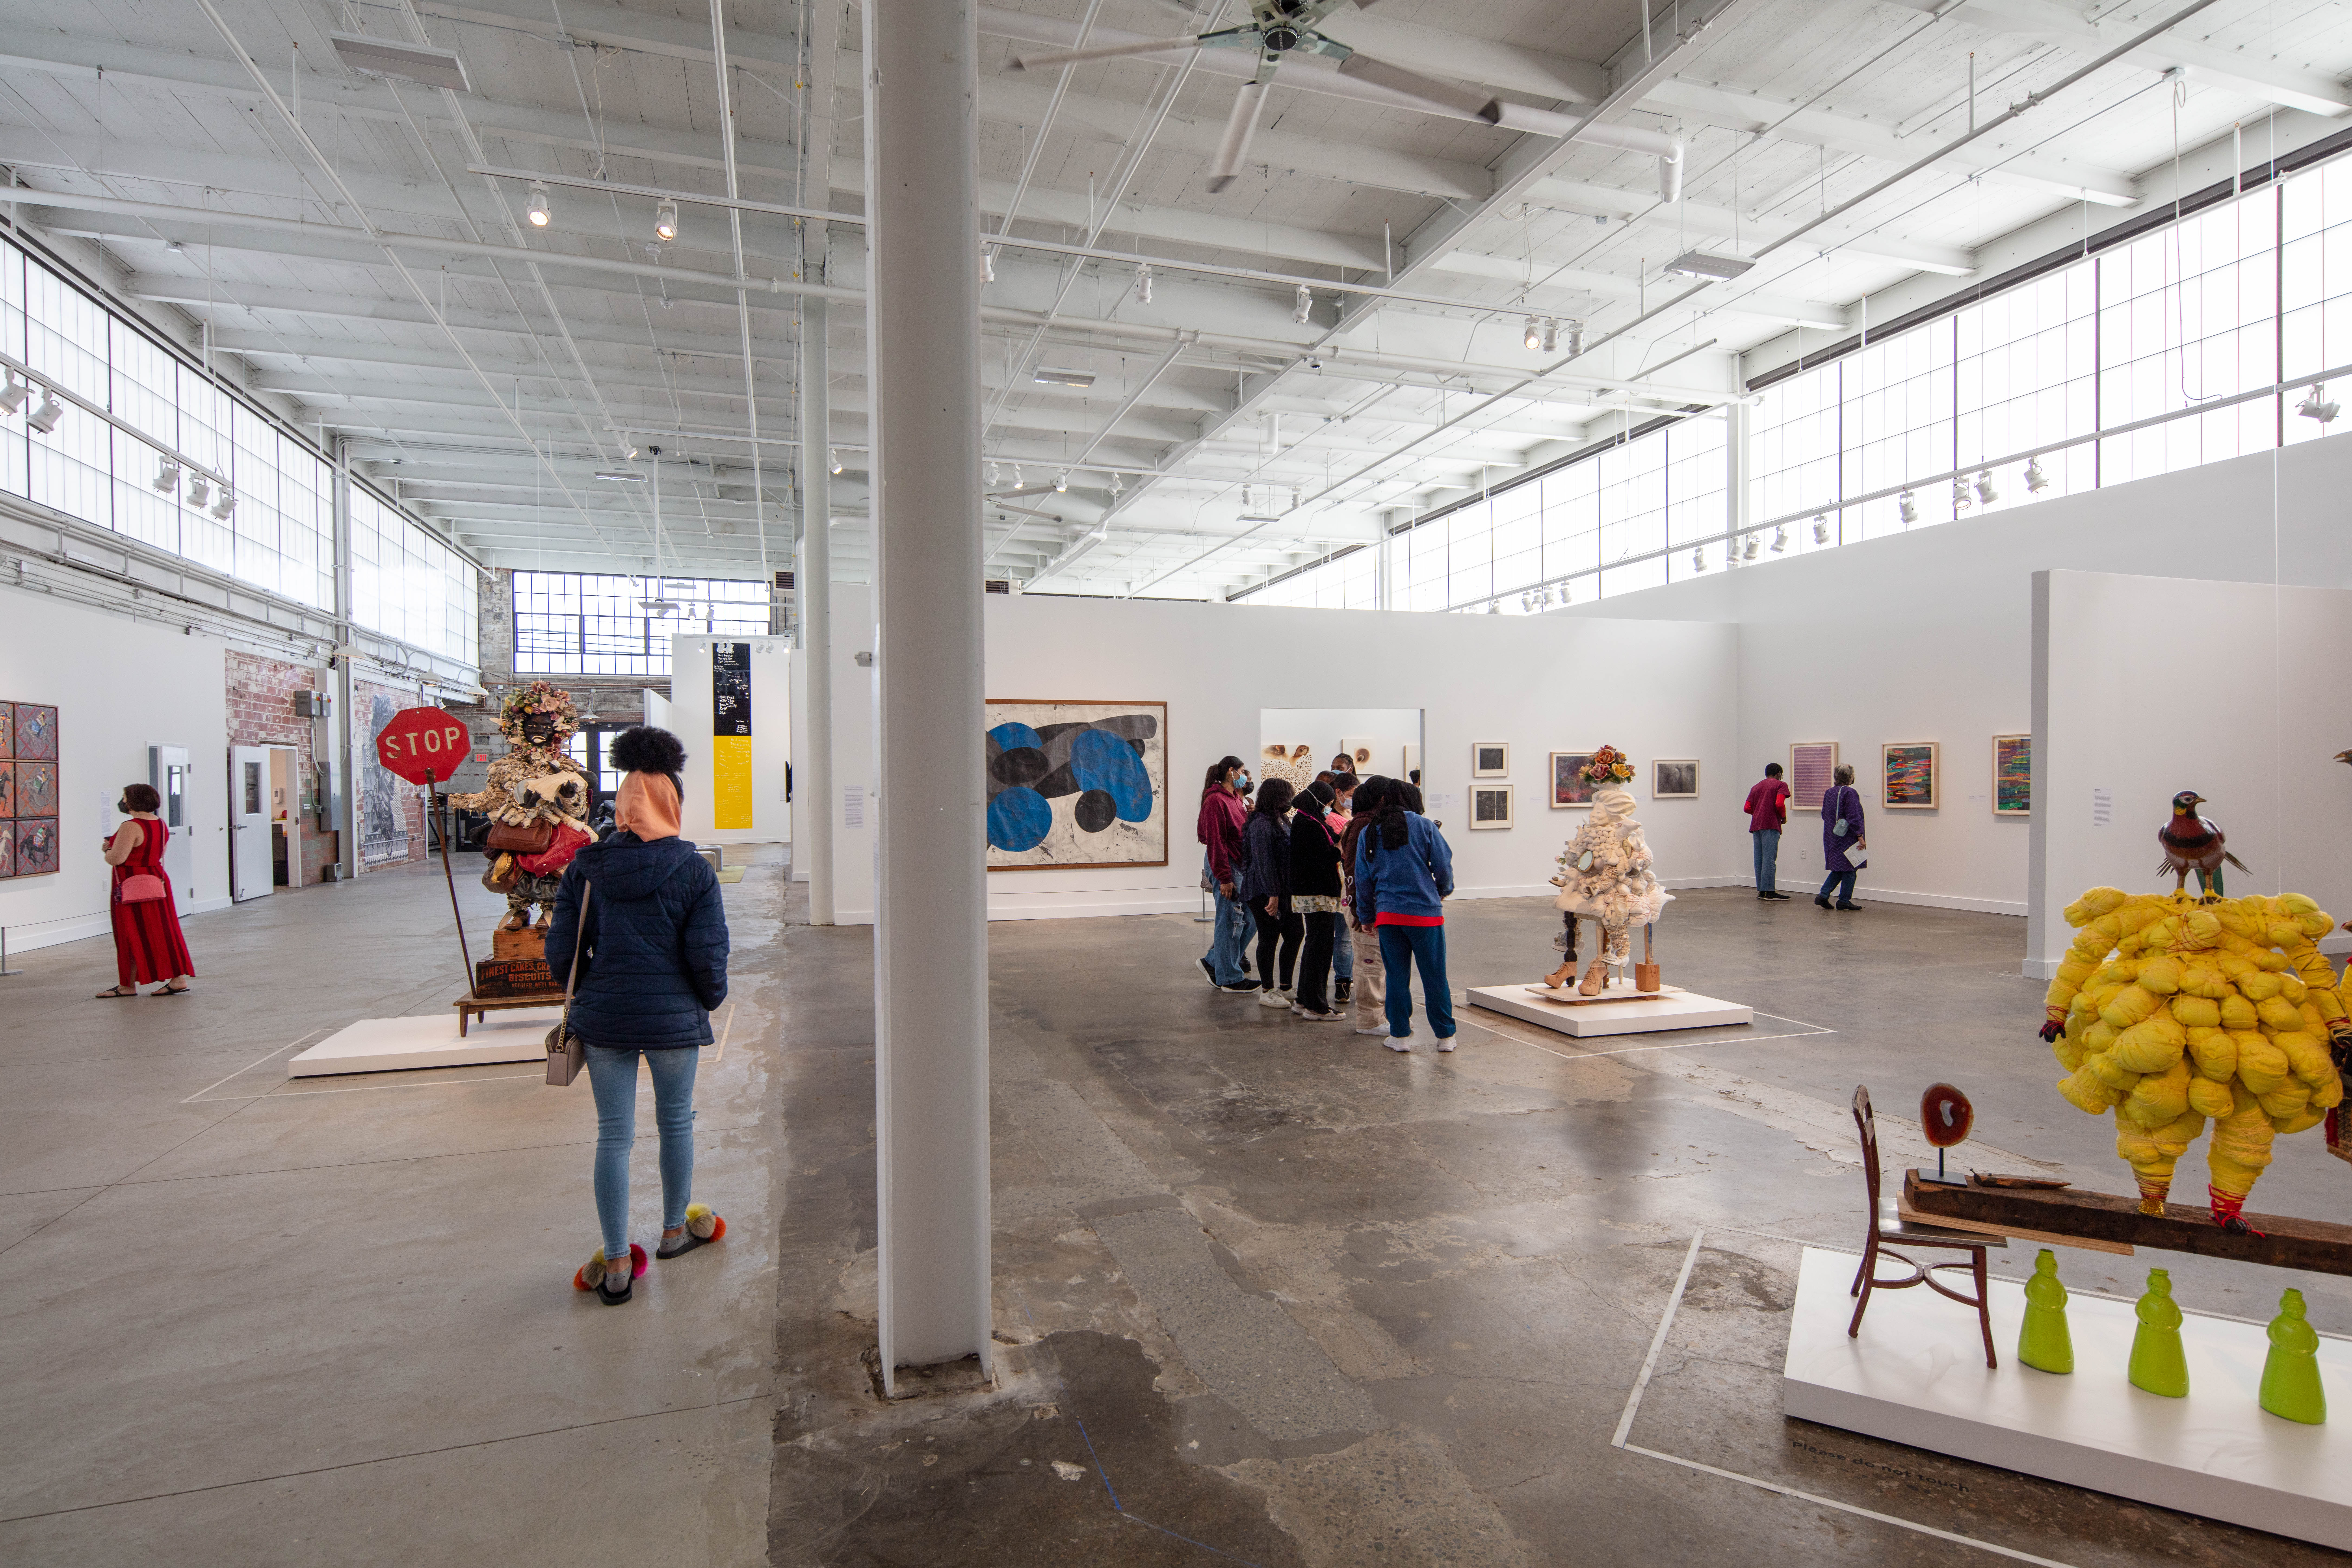 An installation view of sculptures, paintings, and installation artworks in a large industrial gallery space